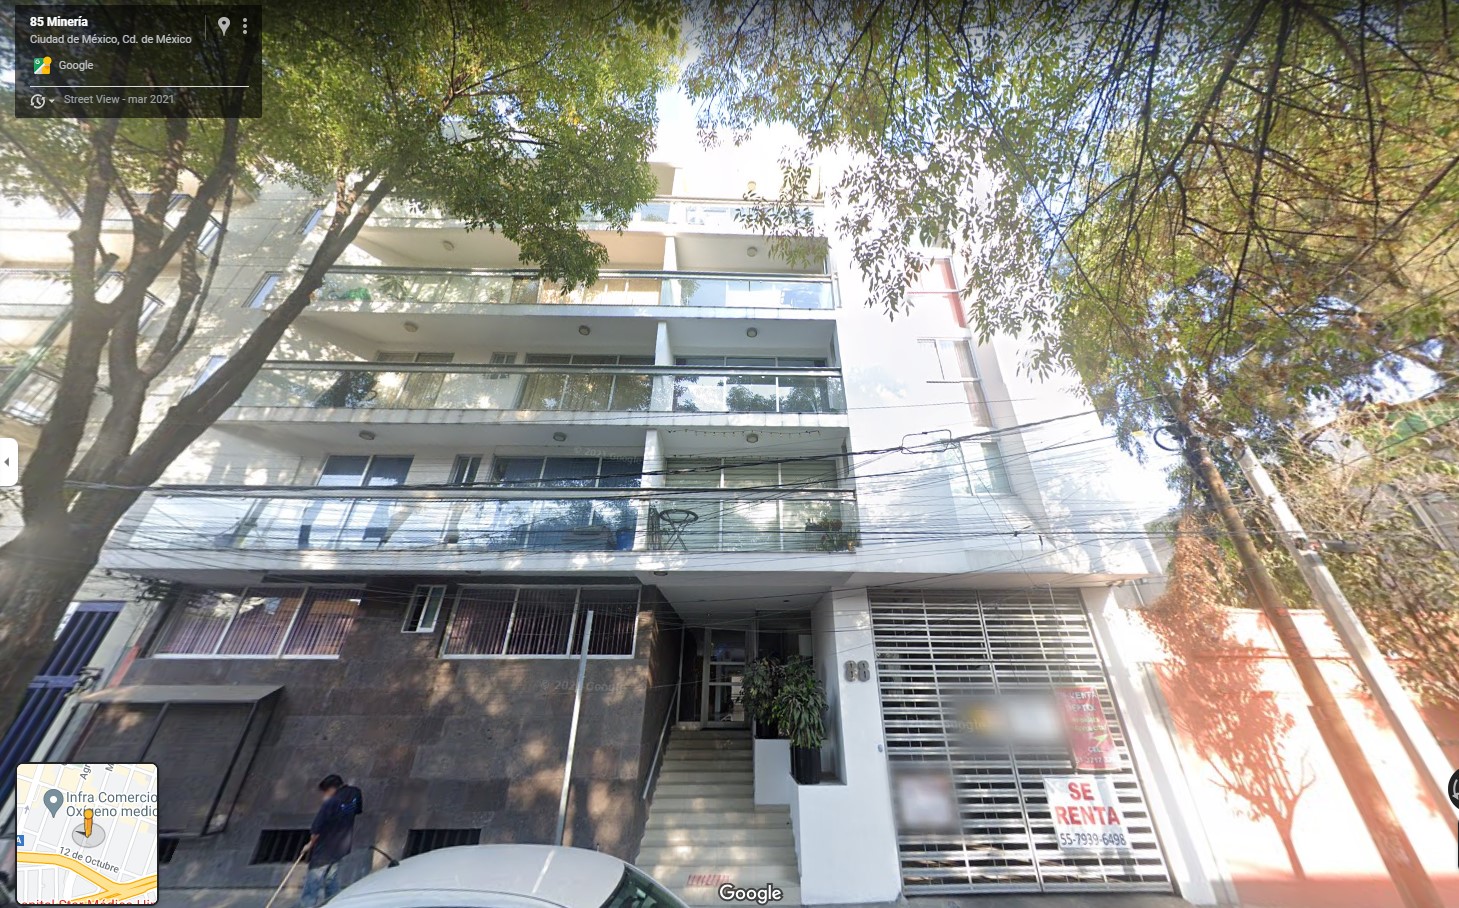 Building allegedly related to the Miguel Hidalgo Real Estate Cartel (Photo: Google Maps)